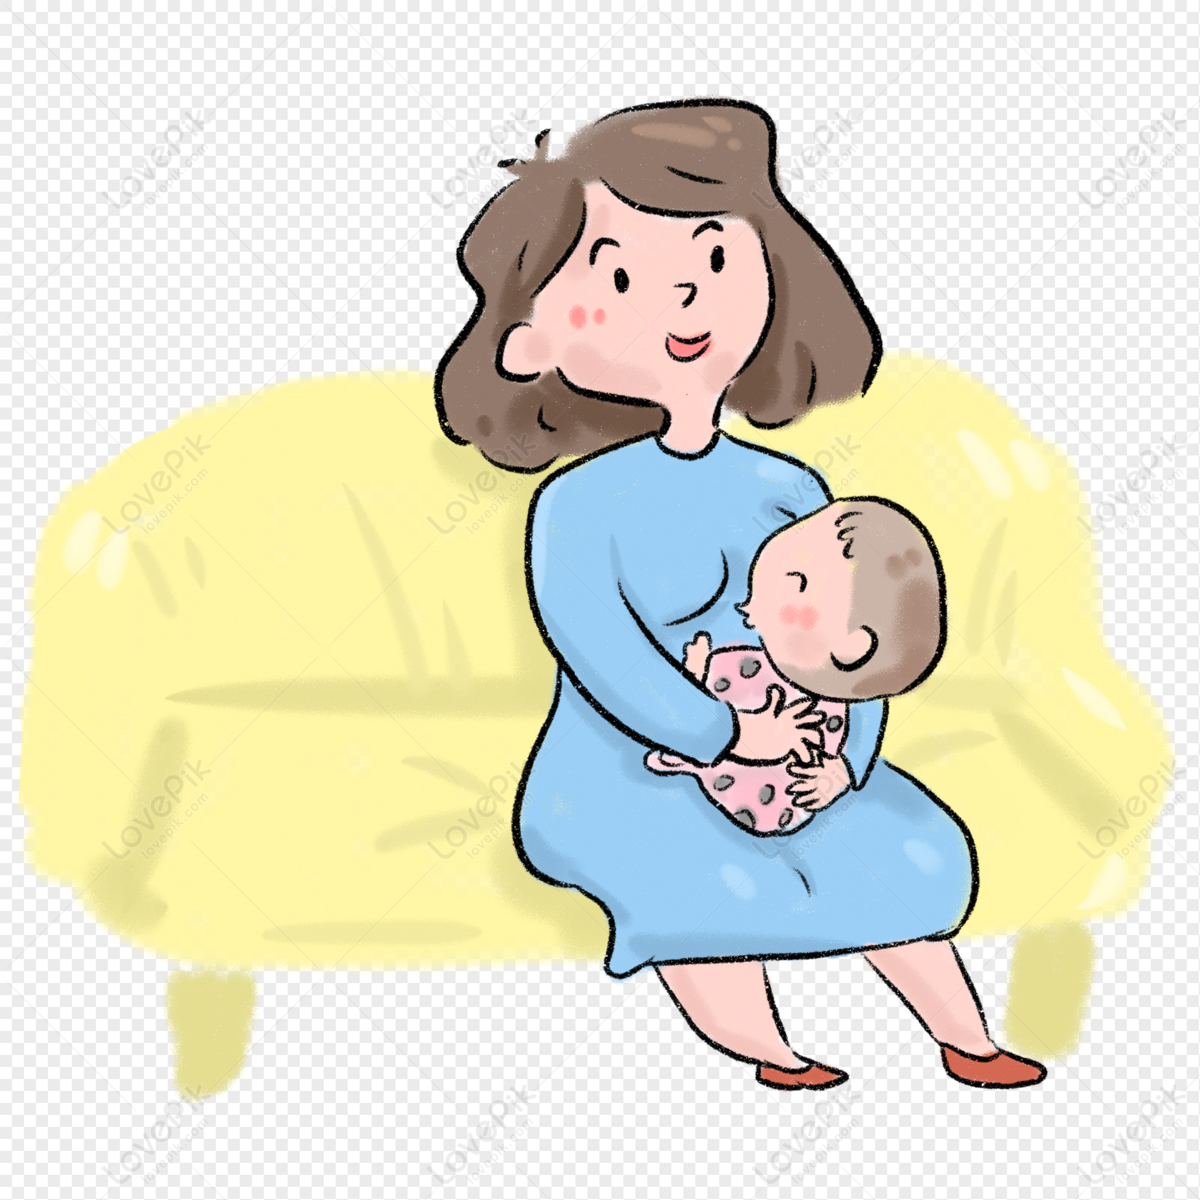 Mother Feeding Baby Cartoon PNG Hd Transparent Image And Clipart Image For  Free Download - Lovepik | 401274594